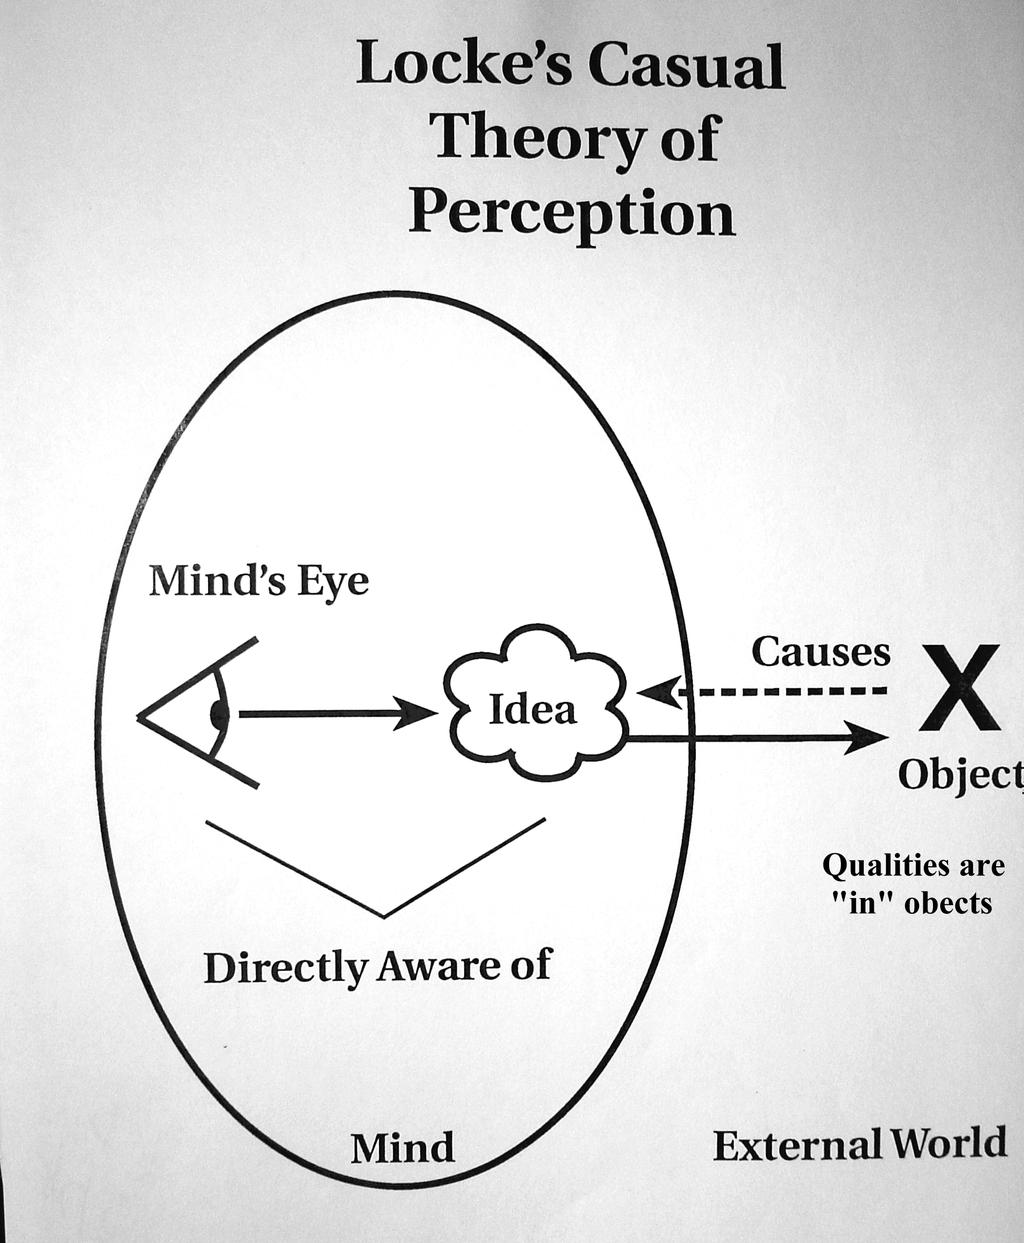 Locke s Causal Theory of Perception: Idea: Whatsoever the mind perceives in itself is the